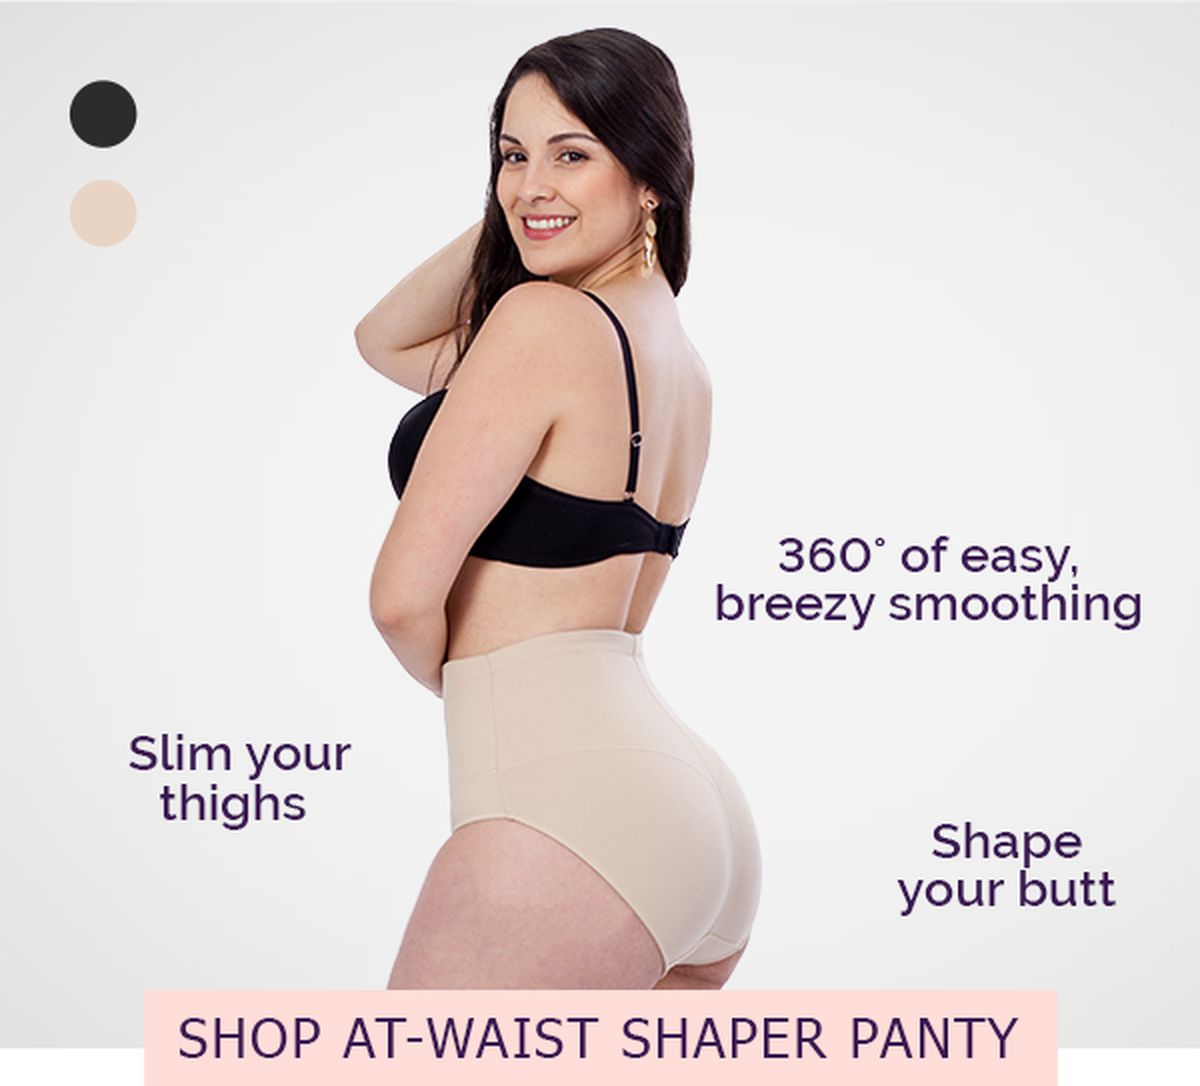 Shapermint - The easiest way to shop shapewear online: NEW! The